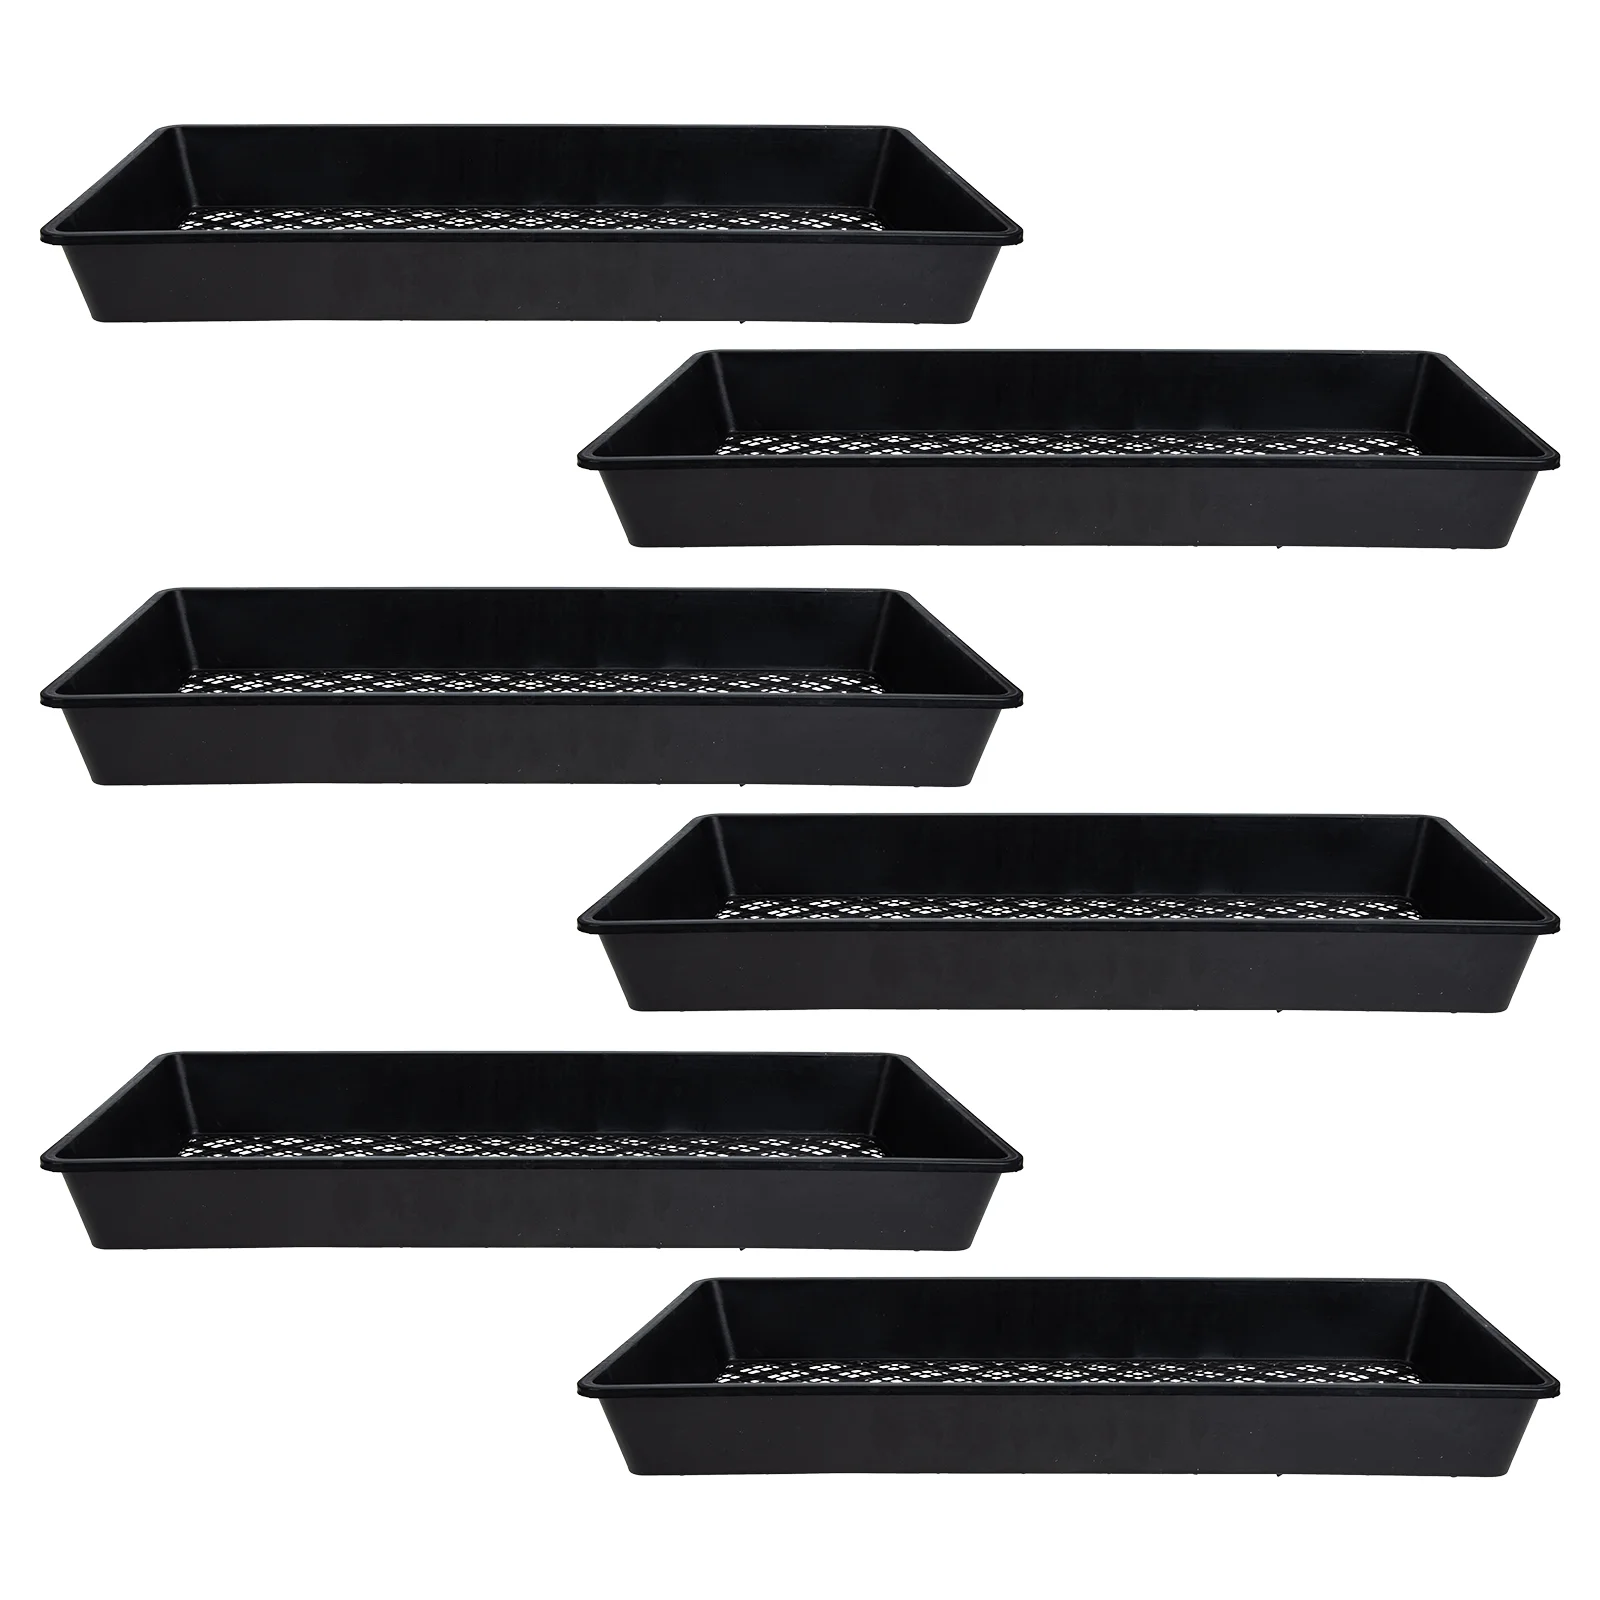 

6 Pcs Hydroponic Tray Plate Sowing Growing Launcher Planter Planting Nursery Plastic Starter Germination